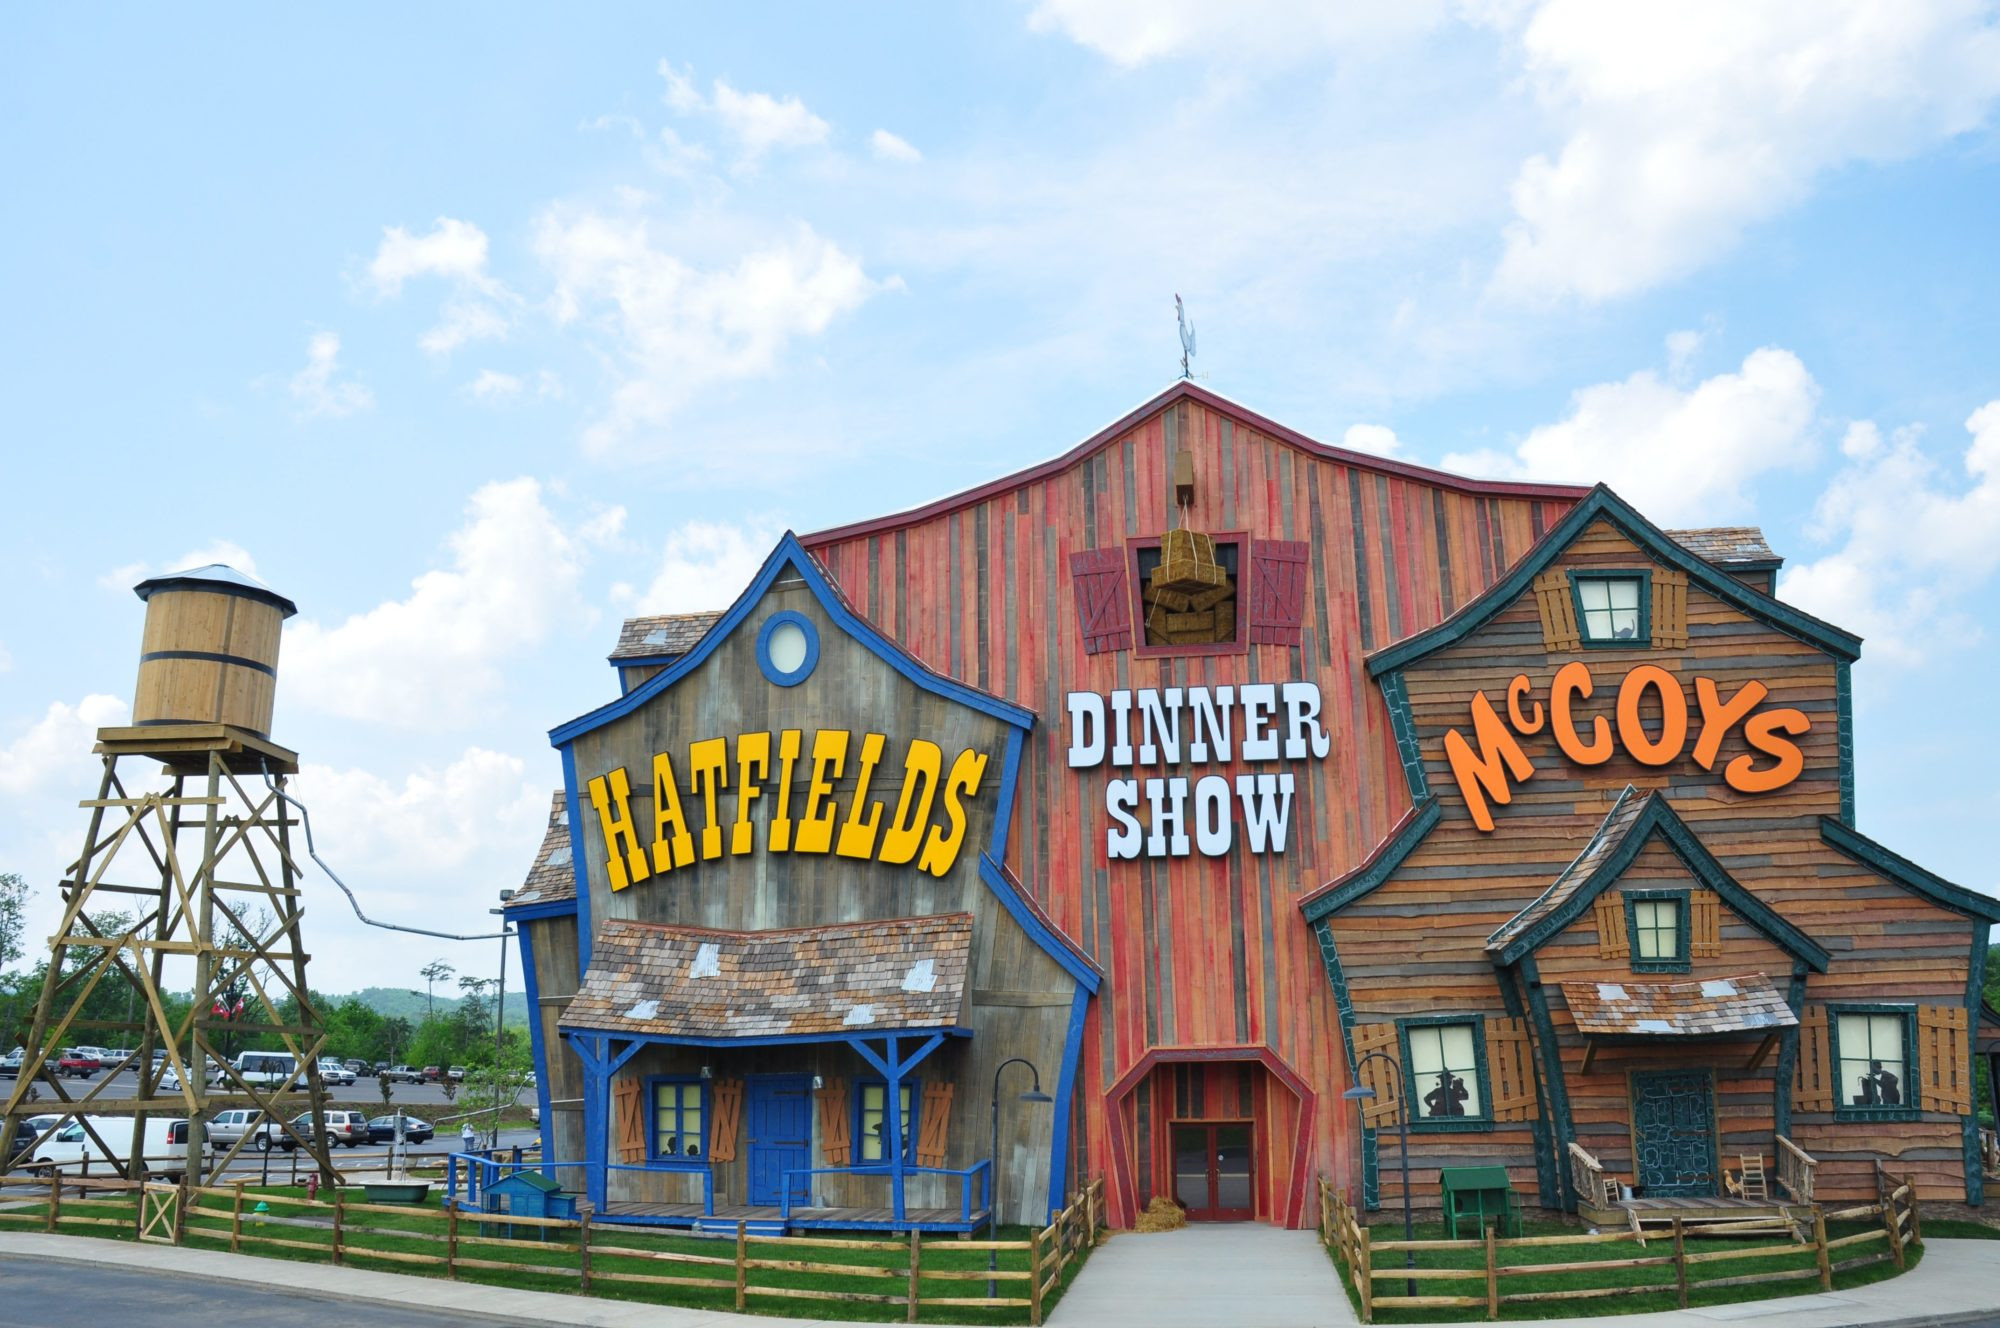 Dinner Shows In Pigeon Forge
 3 Dinner Shows in Pigeon Forge You Need to See on Your